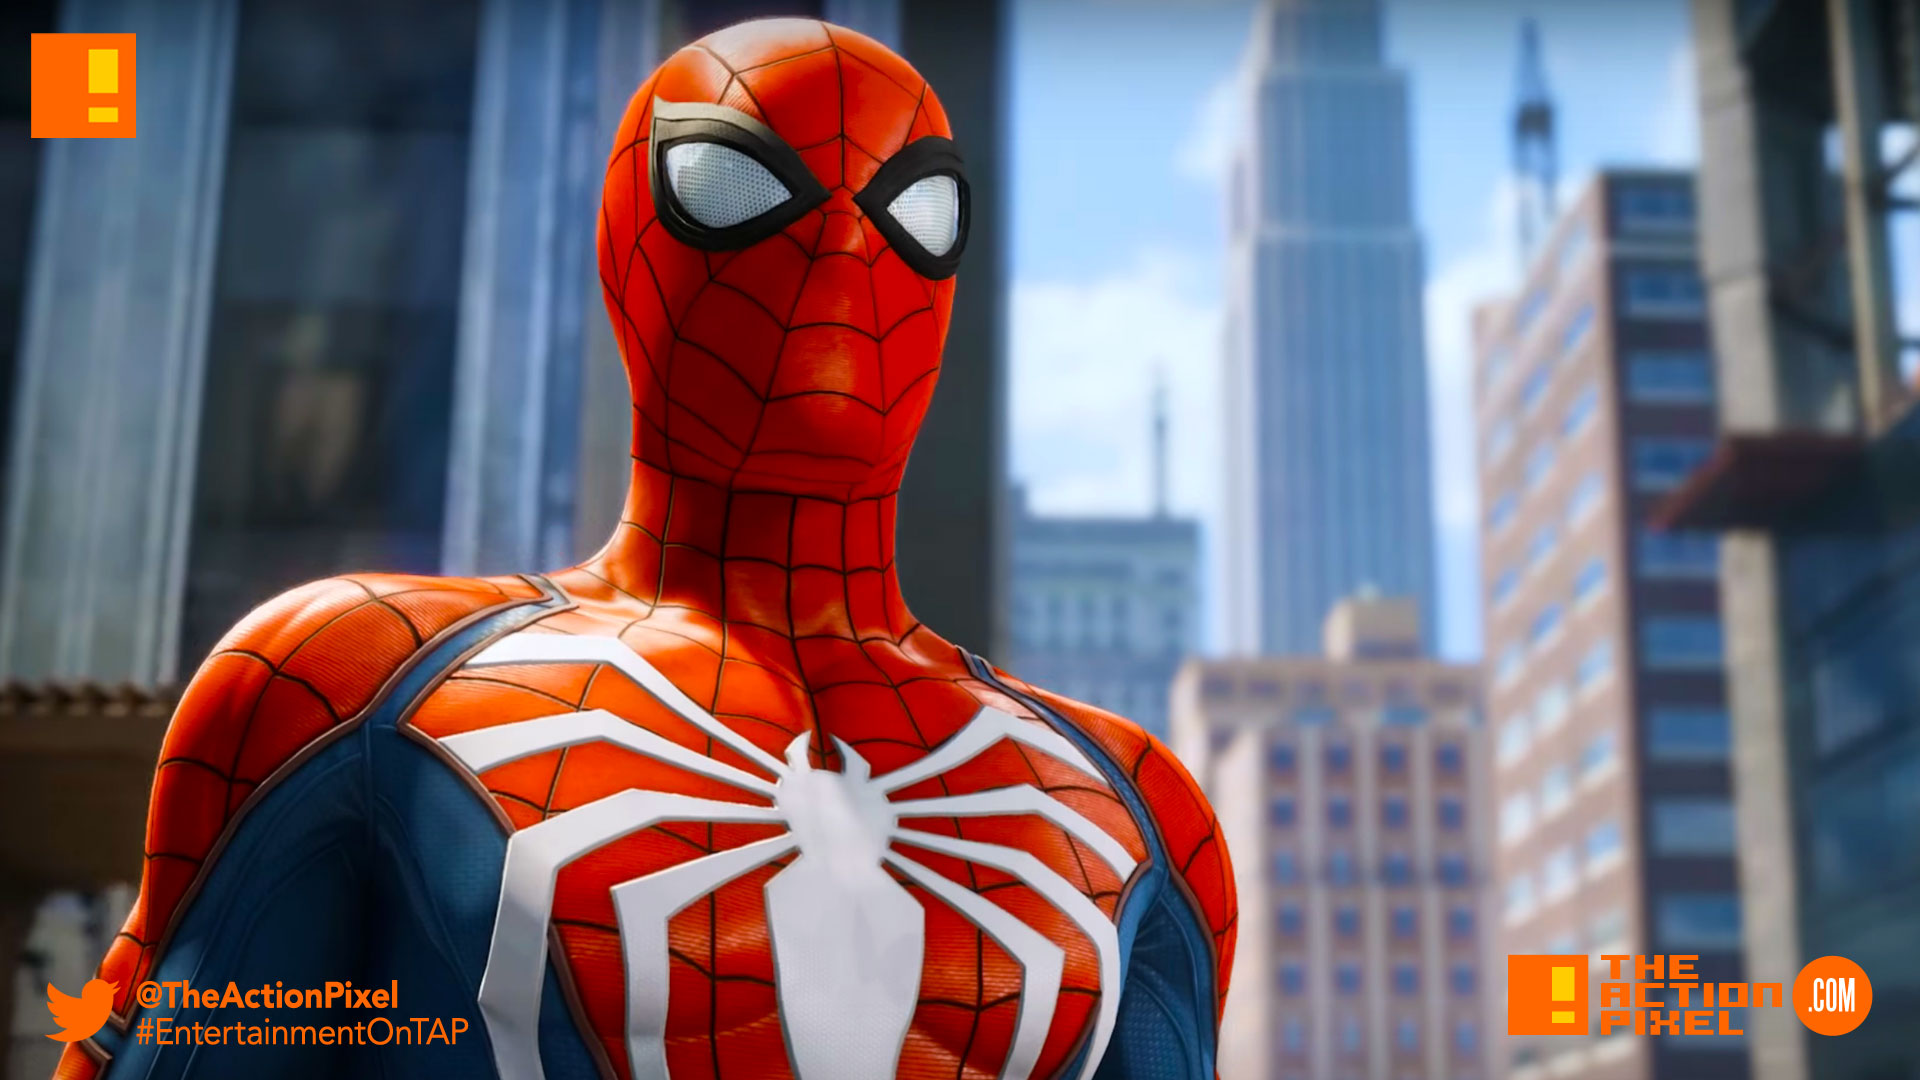 spider-man, marvel, marvel's spider-man,ps4,playstation 4, playstation, peter parker, demons, wilson fisk, fisk, king pin, gameplay trailer, e3 , e3 2017, electronic entertainment expo, marvel comics,the action pixel, entertainment on tap, insomniac games,